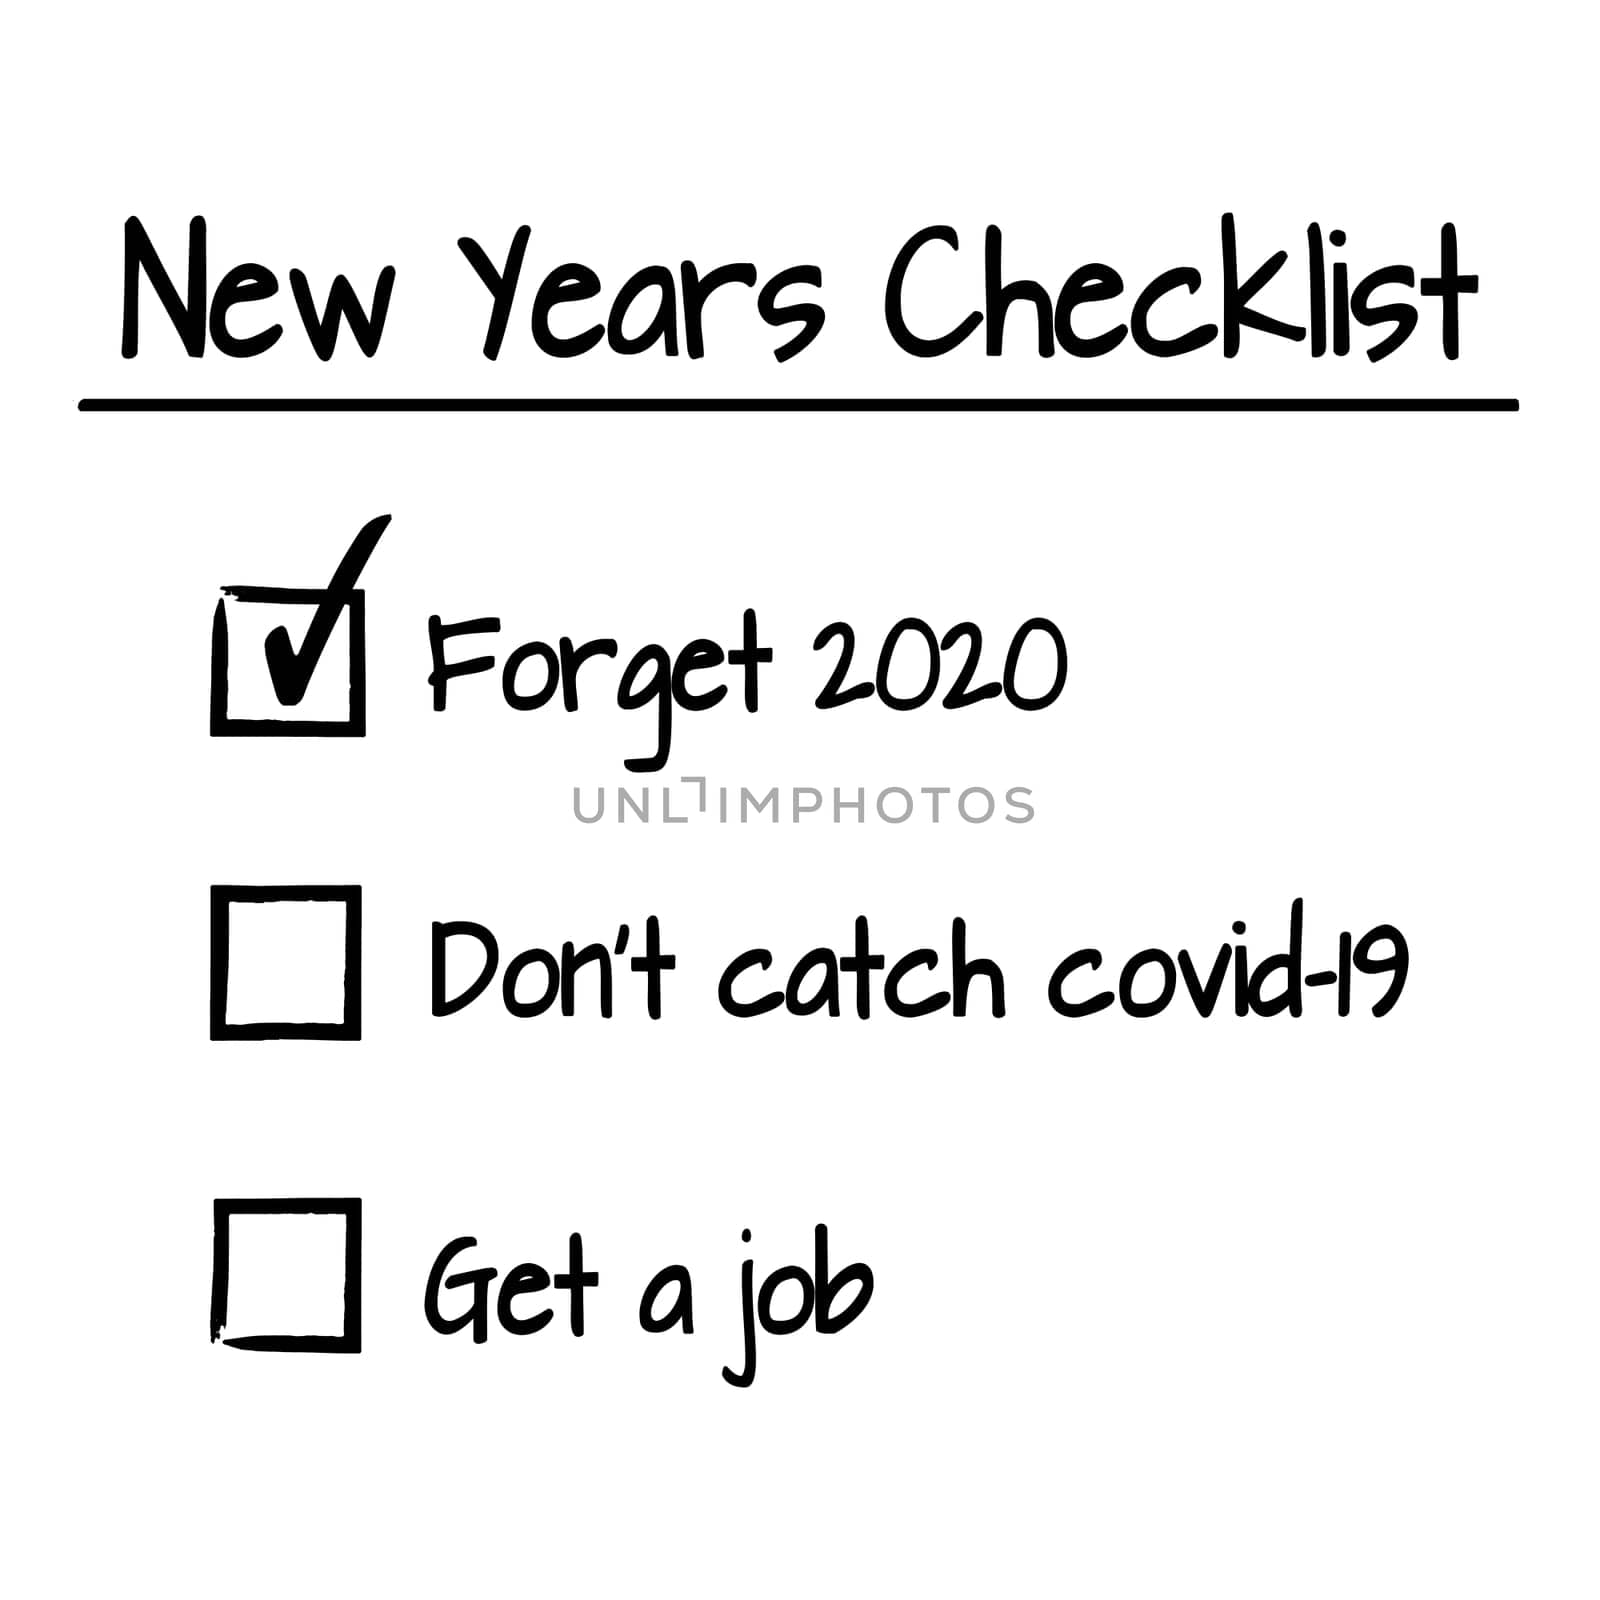 Funny new years checklist by Bigalbaloo